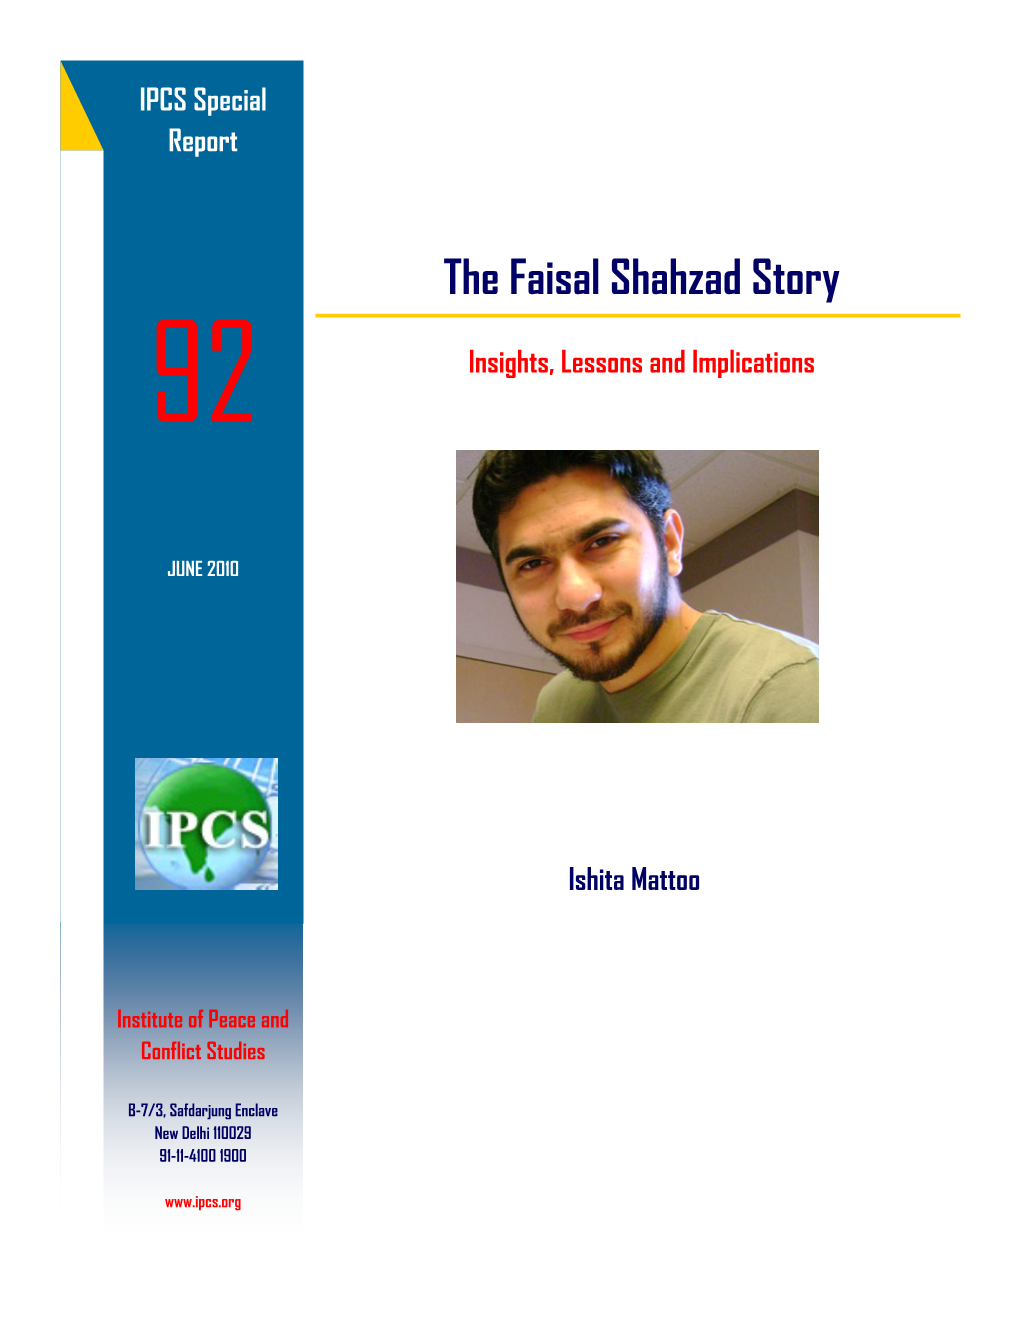 The Faisal Shahzad Story: Insights, Lessons and Implications